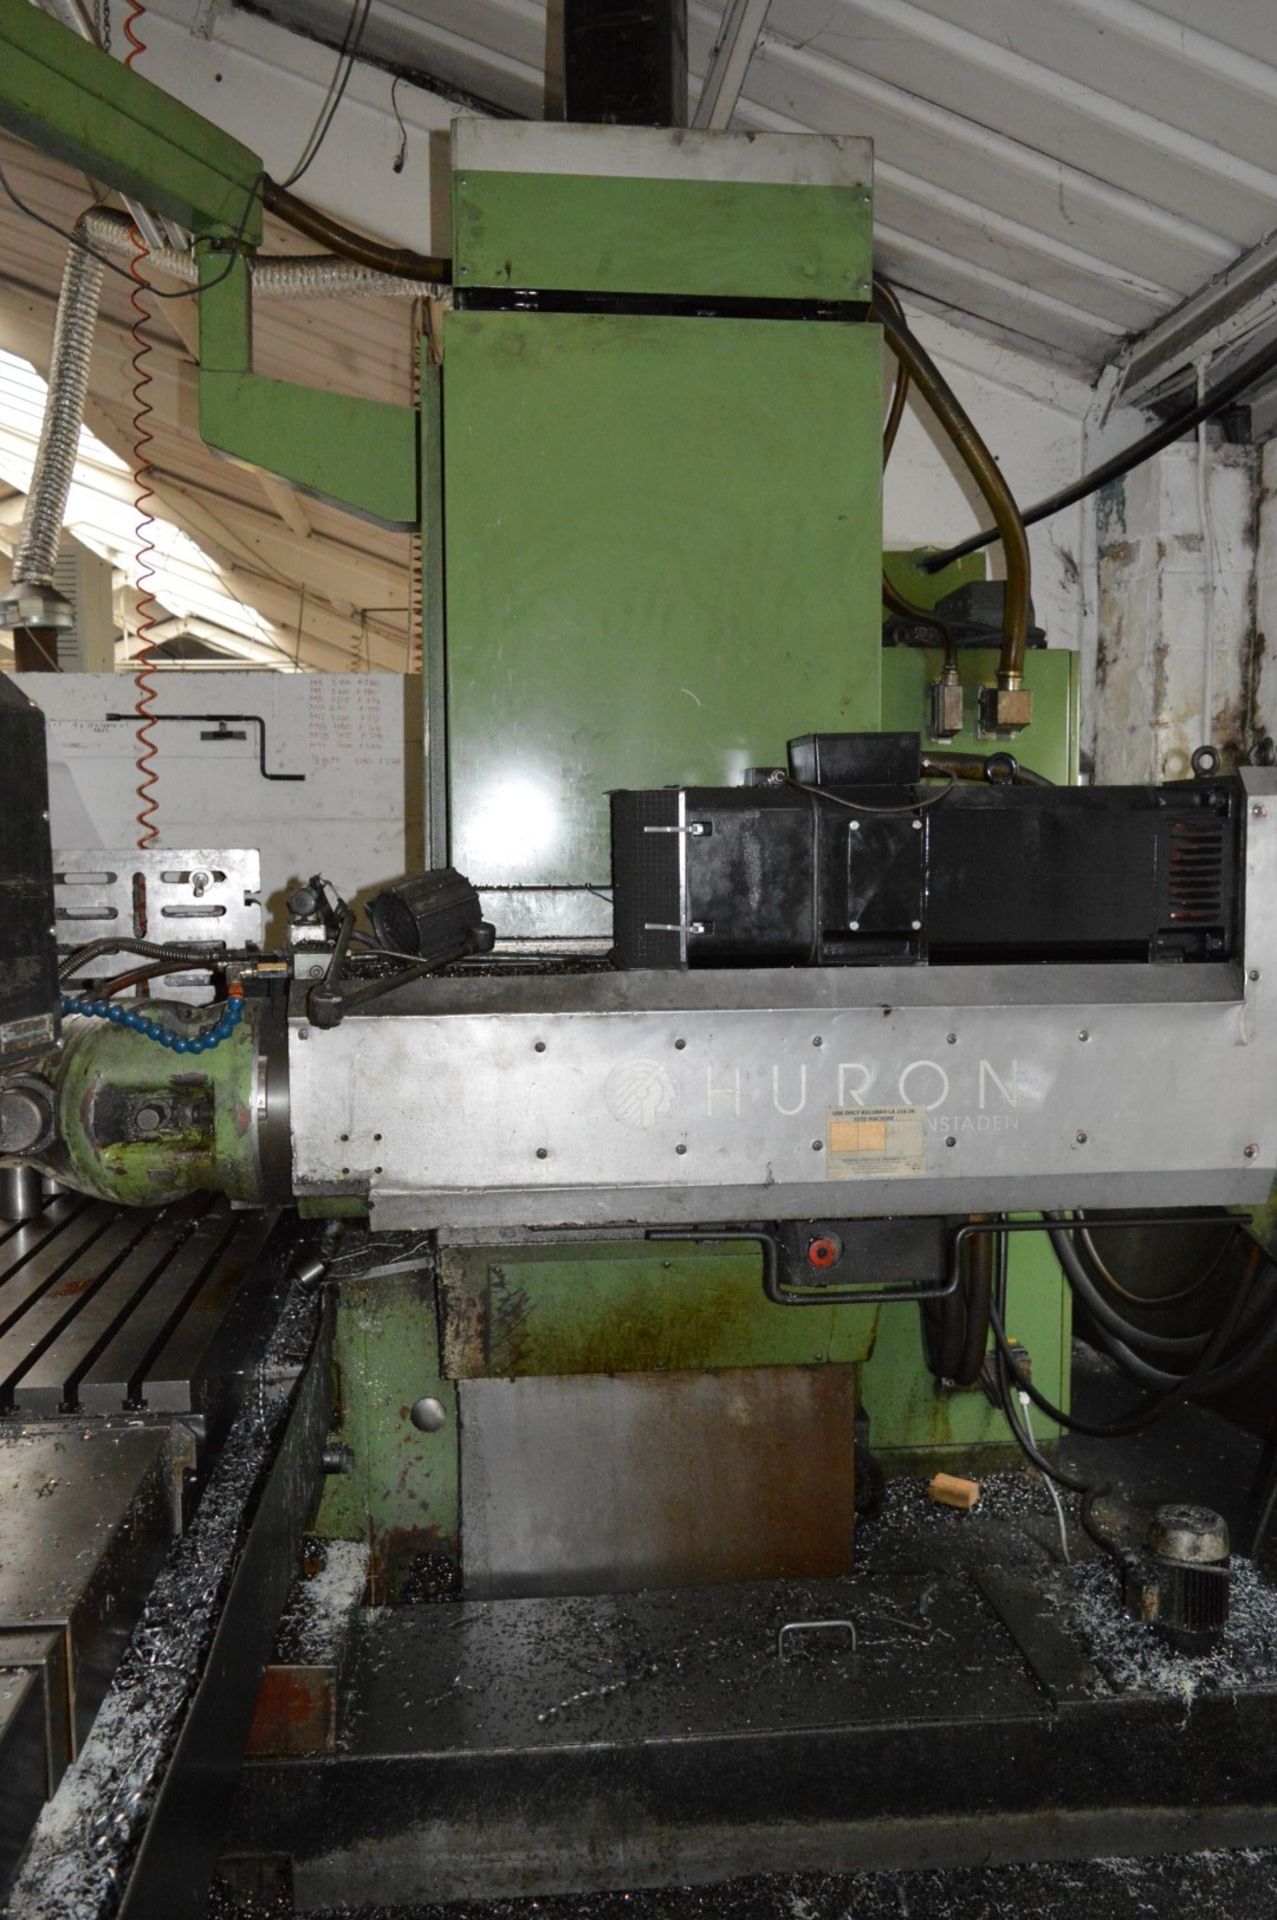 1 x Huron SXB 523 CNC Bed Milling Machine - Location: Worcester WR14 - Image 11 of 19